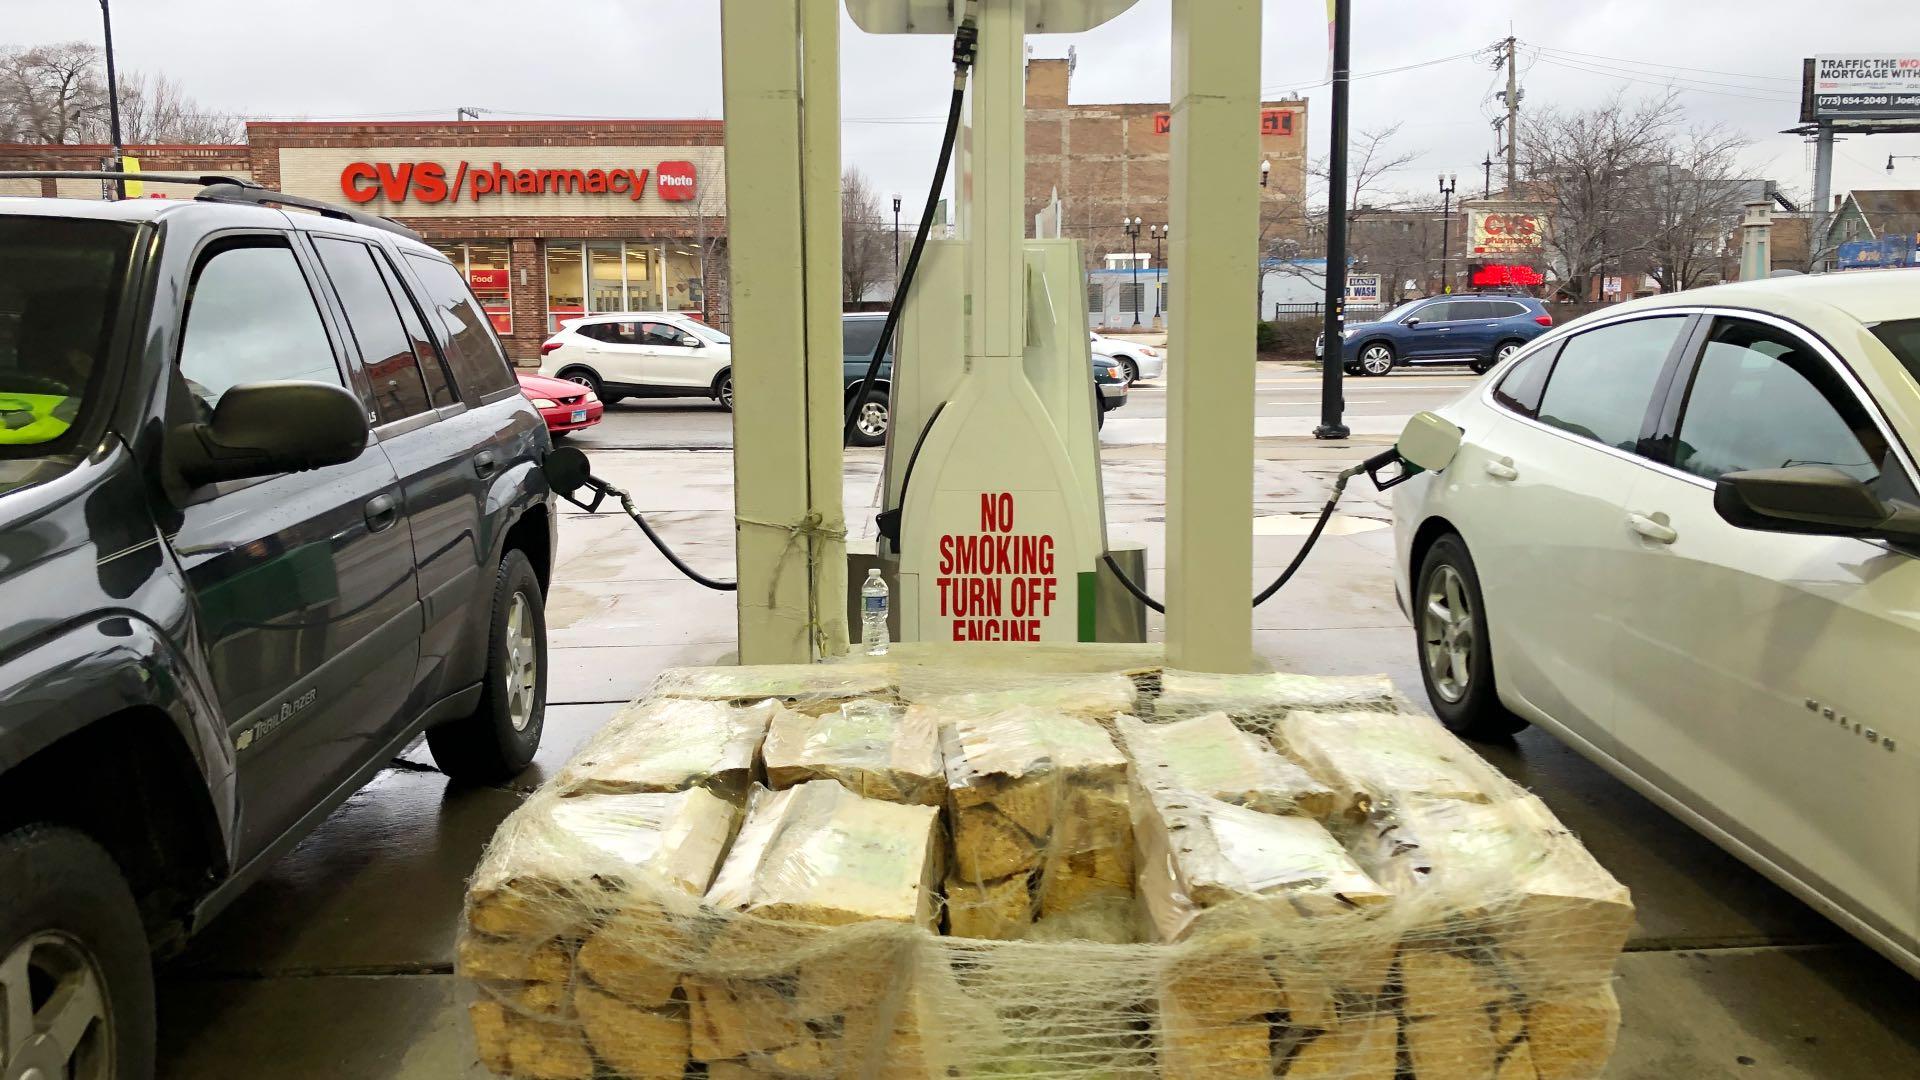 Efficiency at the pumps: Volunteers filled two cars at once to keep the line moving. (Patty Wetli / WTTW News)